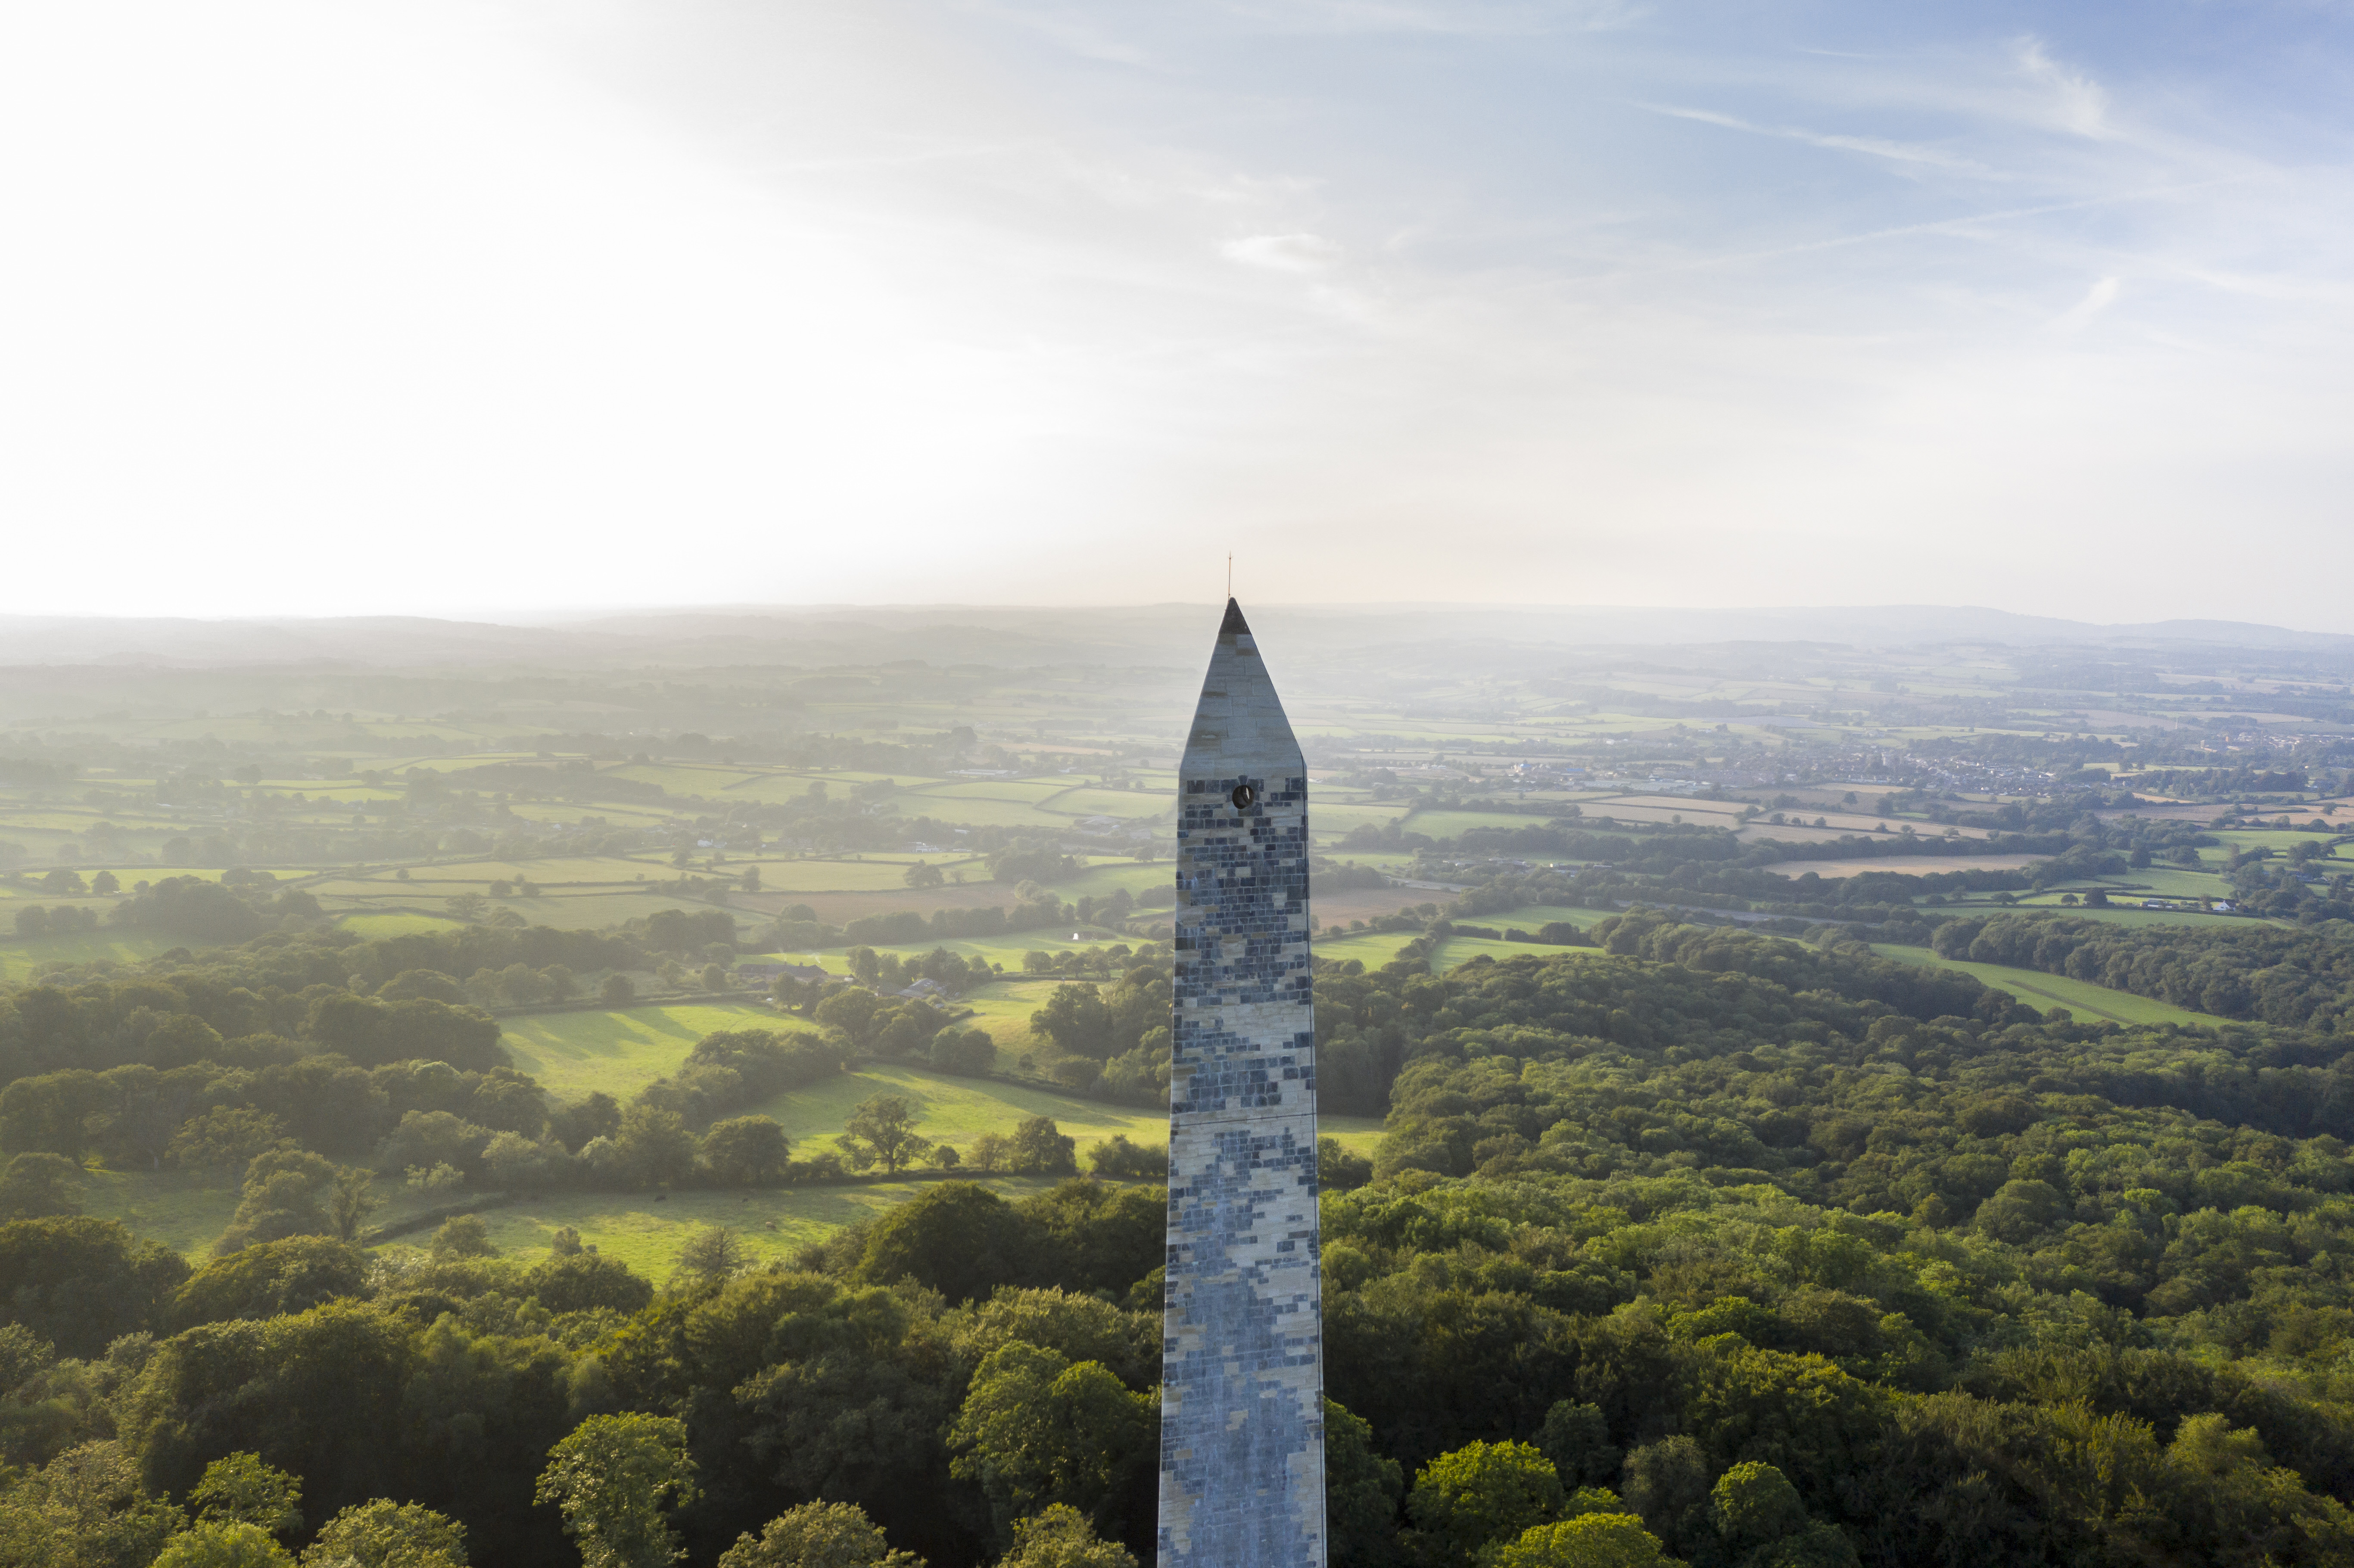 The Wellington Monument has been standing for over 150 years but was in a poor state of repair (John Miller/National Trust/PA)